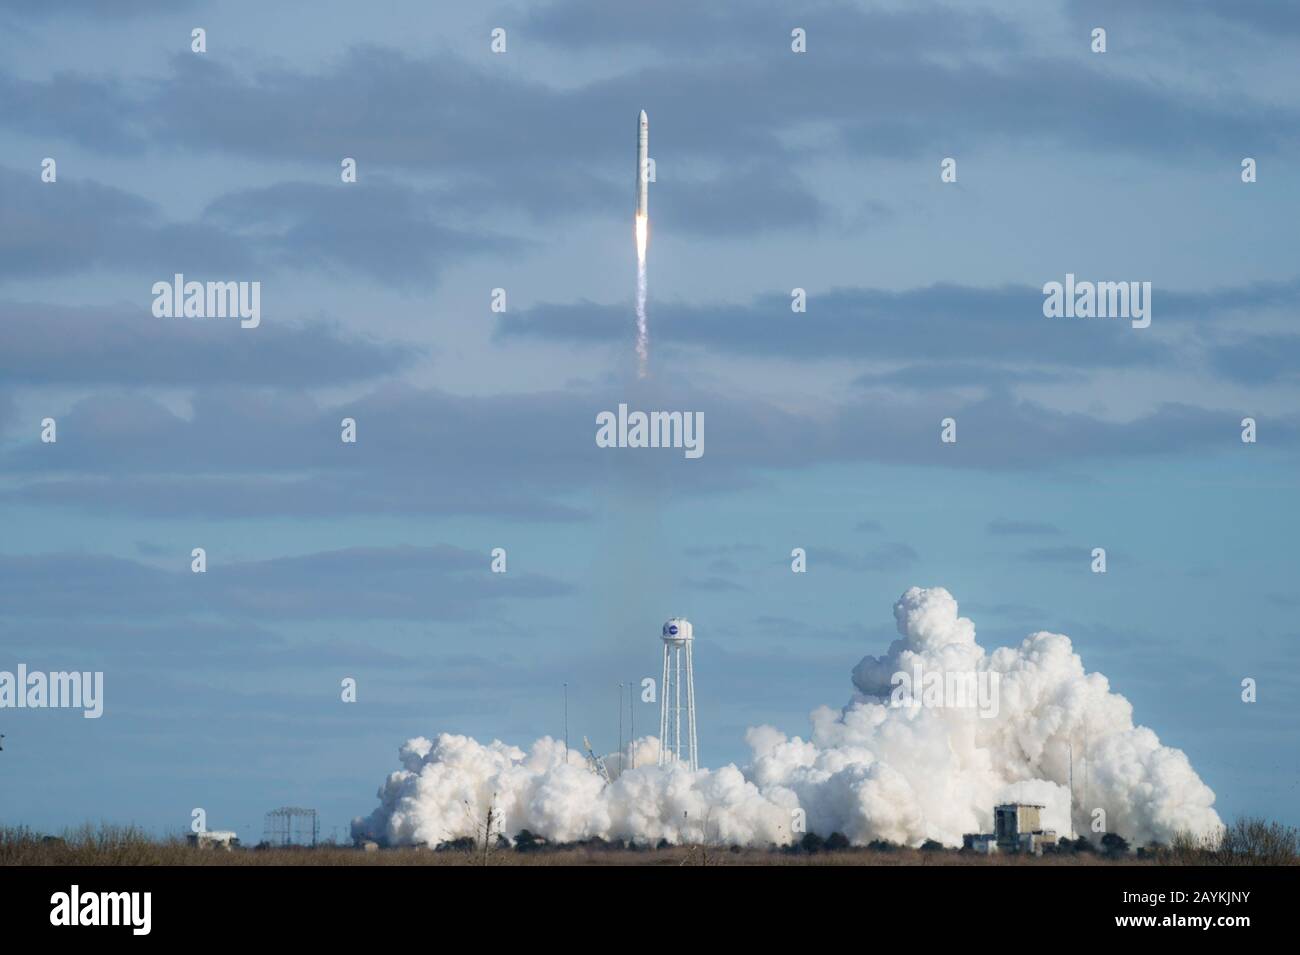 Wallops Island, USA. 15th Feb, 2020. The Antares rocket carrying the Cygnus cargo spacecraft lifts off from NASA's Wallops Flight Facility in Wallops Island, Virginia, the United States, on Feb. 15, 2020. A U.S. rocket was launched on Saturday from NASA's Wallops Flight Facility on Virginia's Eastern Shore, carrying cargo with the space agency's resupply mission for the International Space Station (ISS). Credit: Ting Shen/Xinhua/Alamy Live News Stock Photo